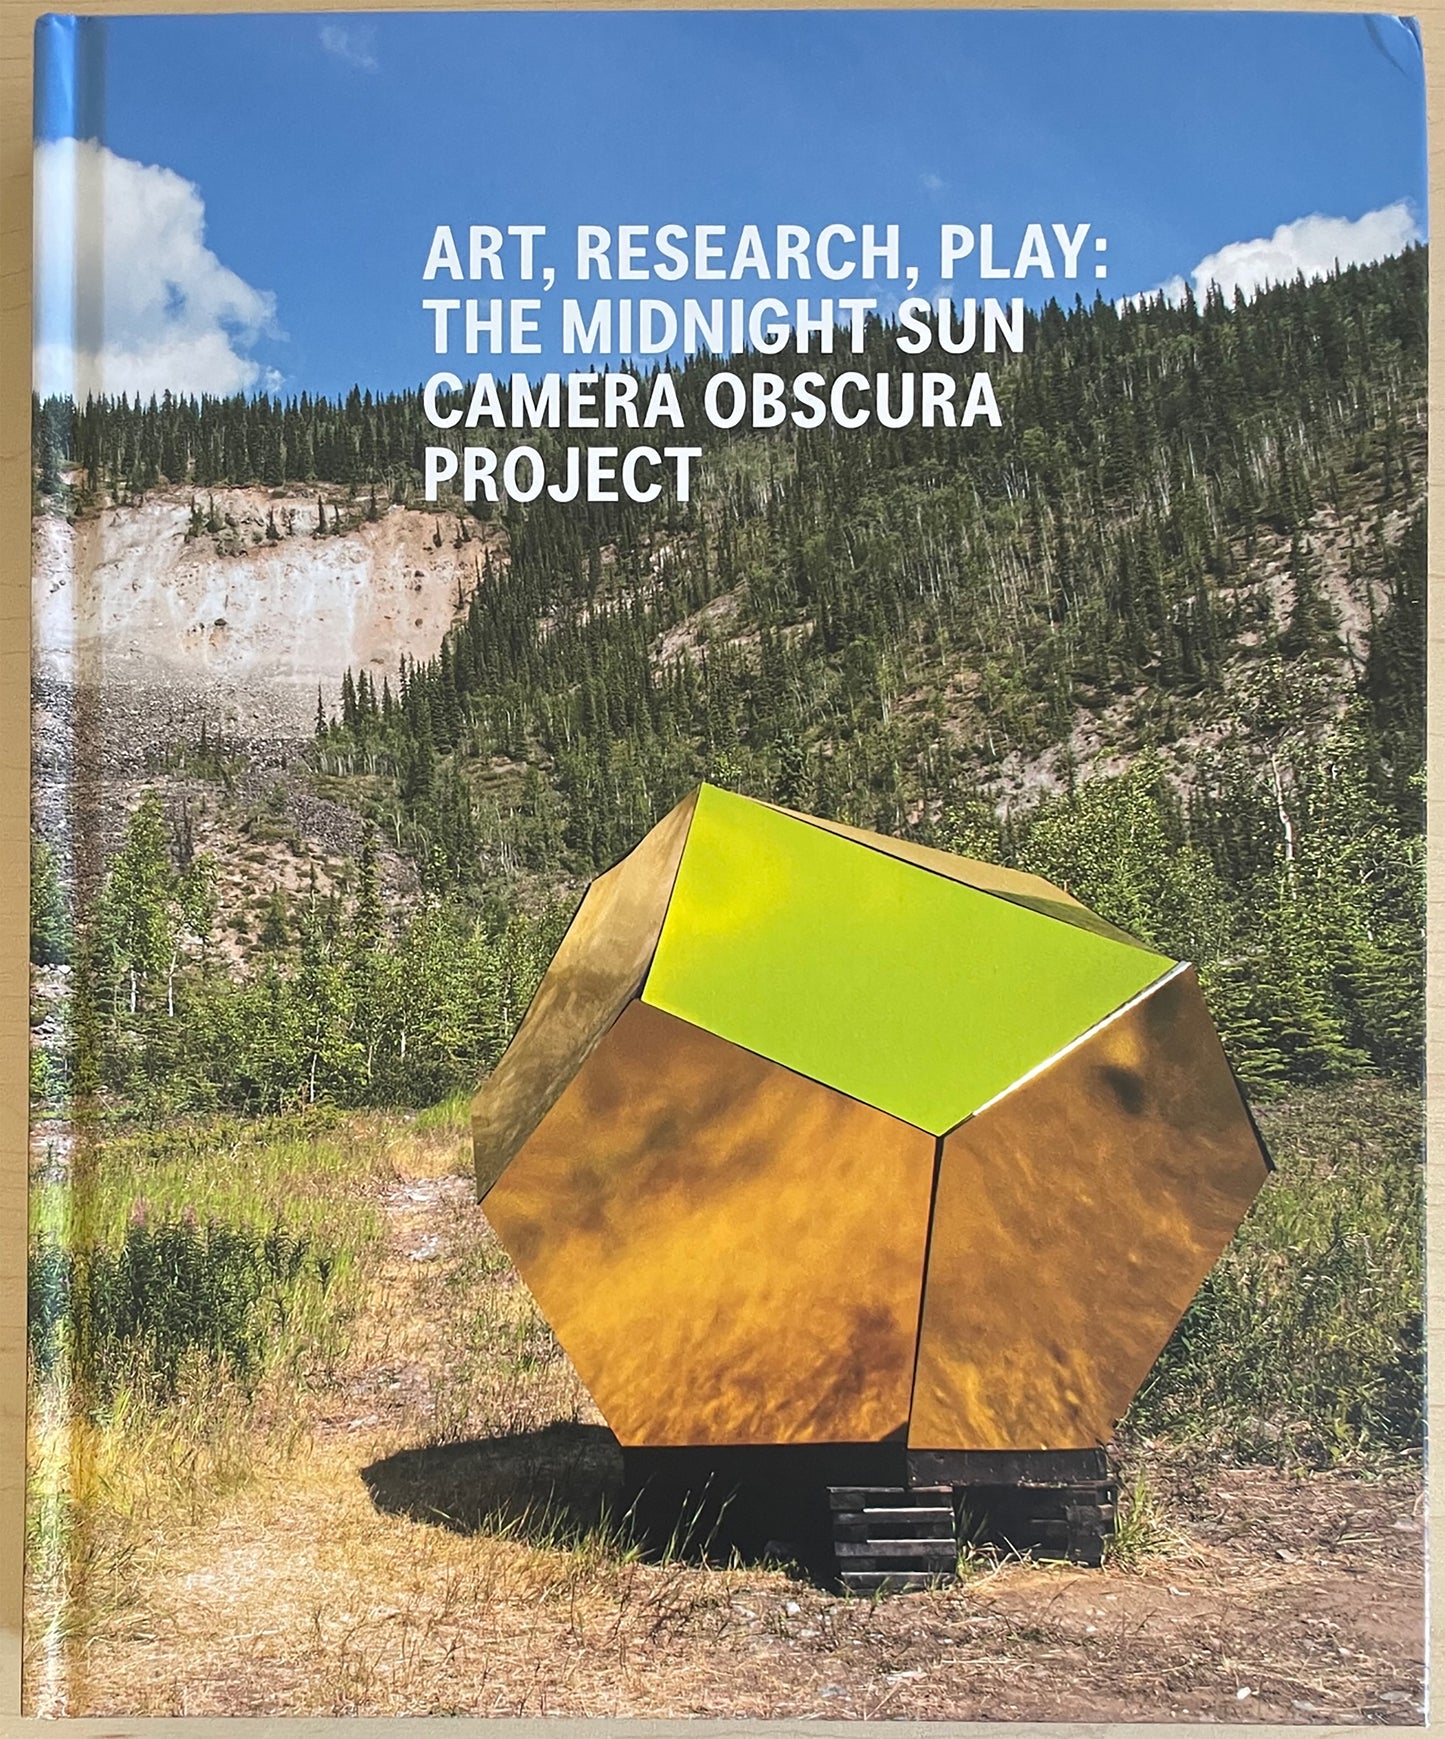 ART, RESEARCH, PLAY: THE MIDNIGHT SUN CAMERA OBSCURA PROJECT